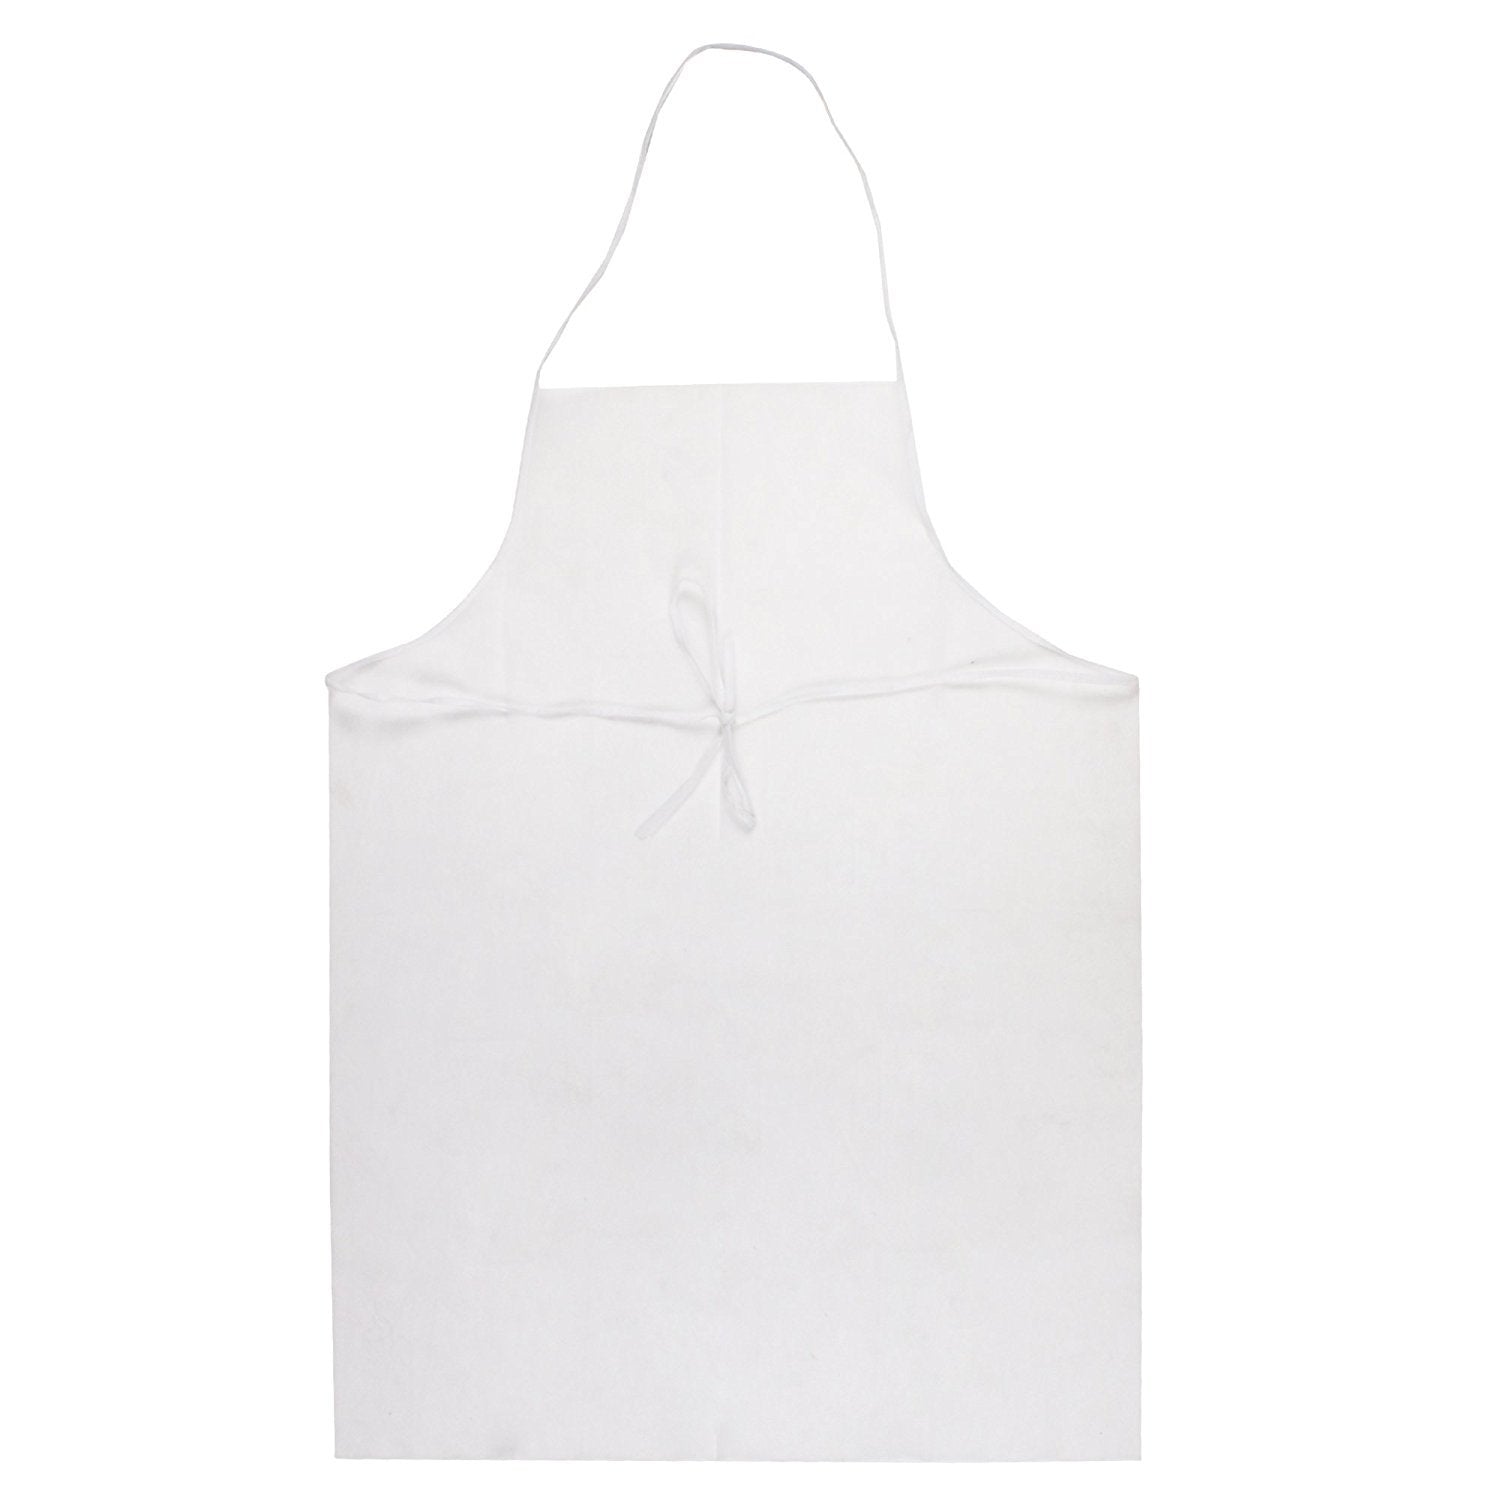 Disposable white Apron - Pack of 50